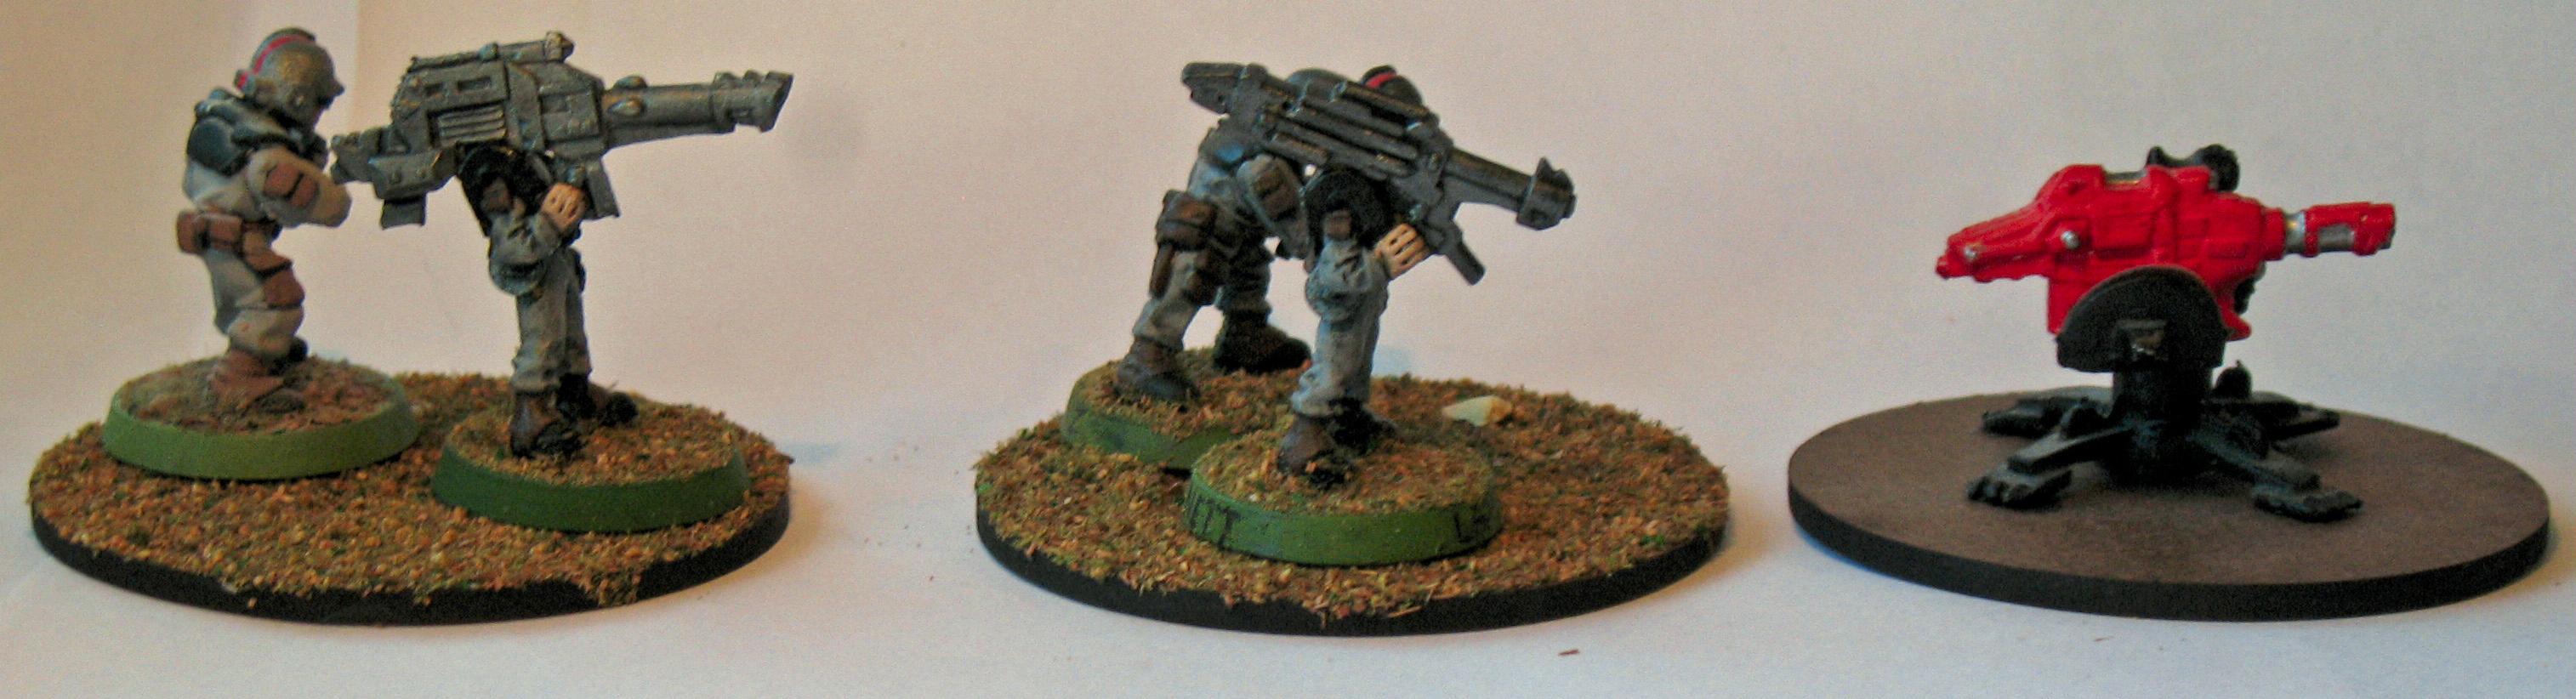 Cadians, Guard, Imperial Guard, Rouge Trader